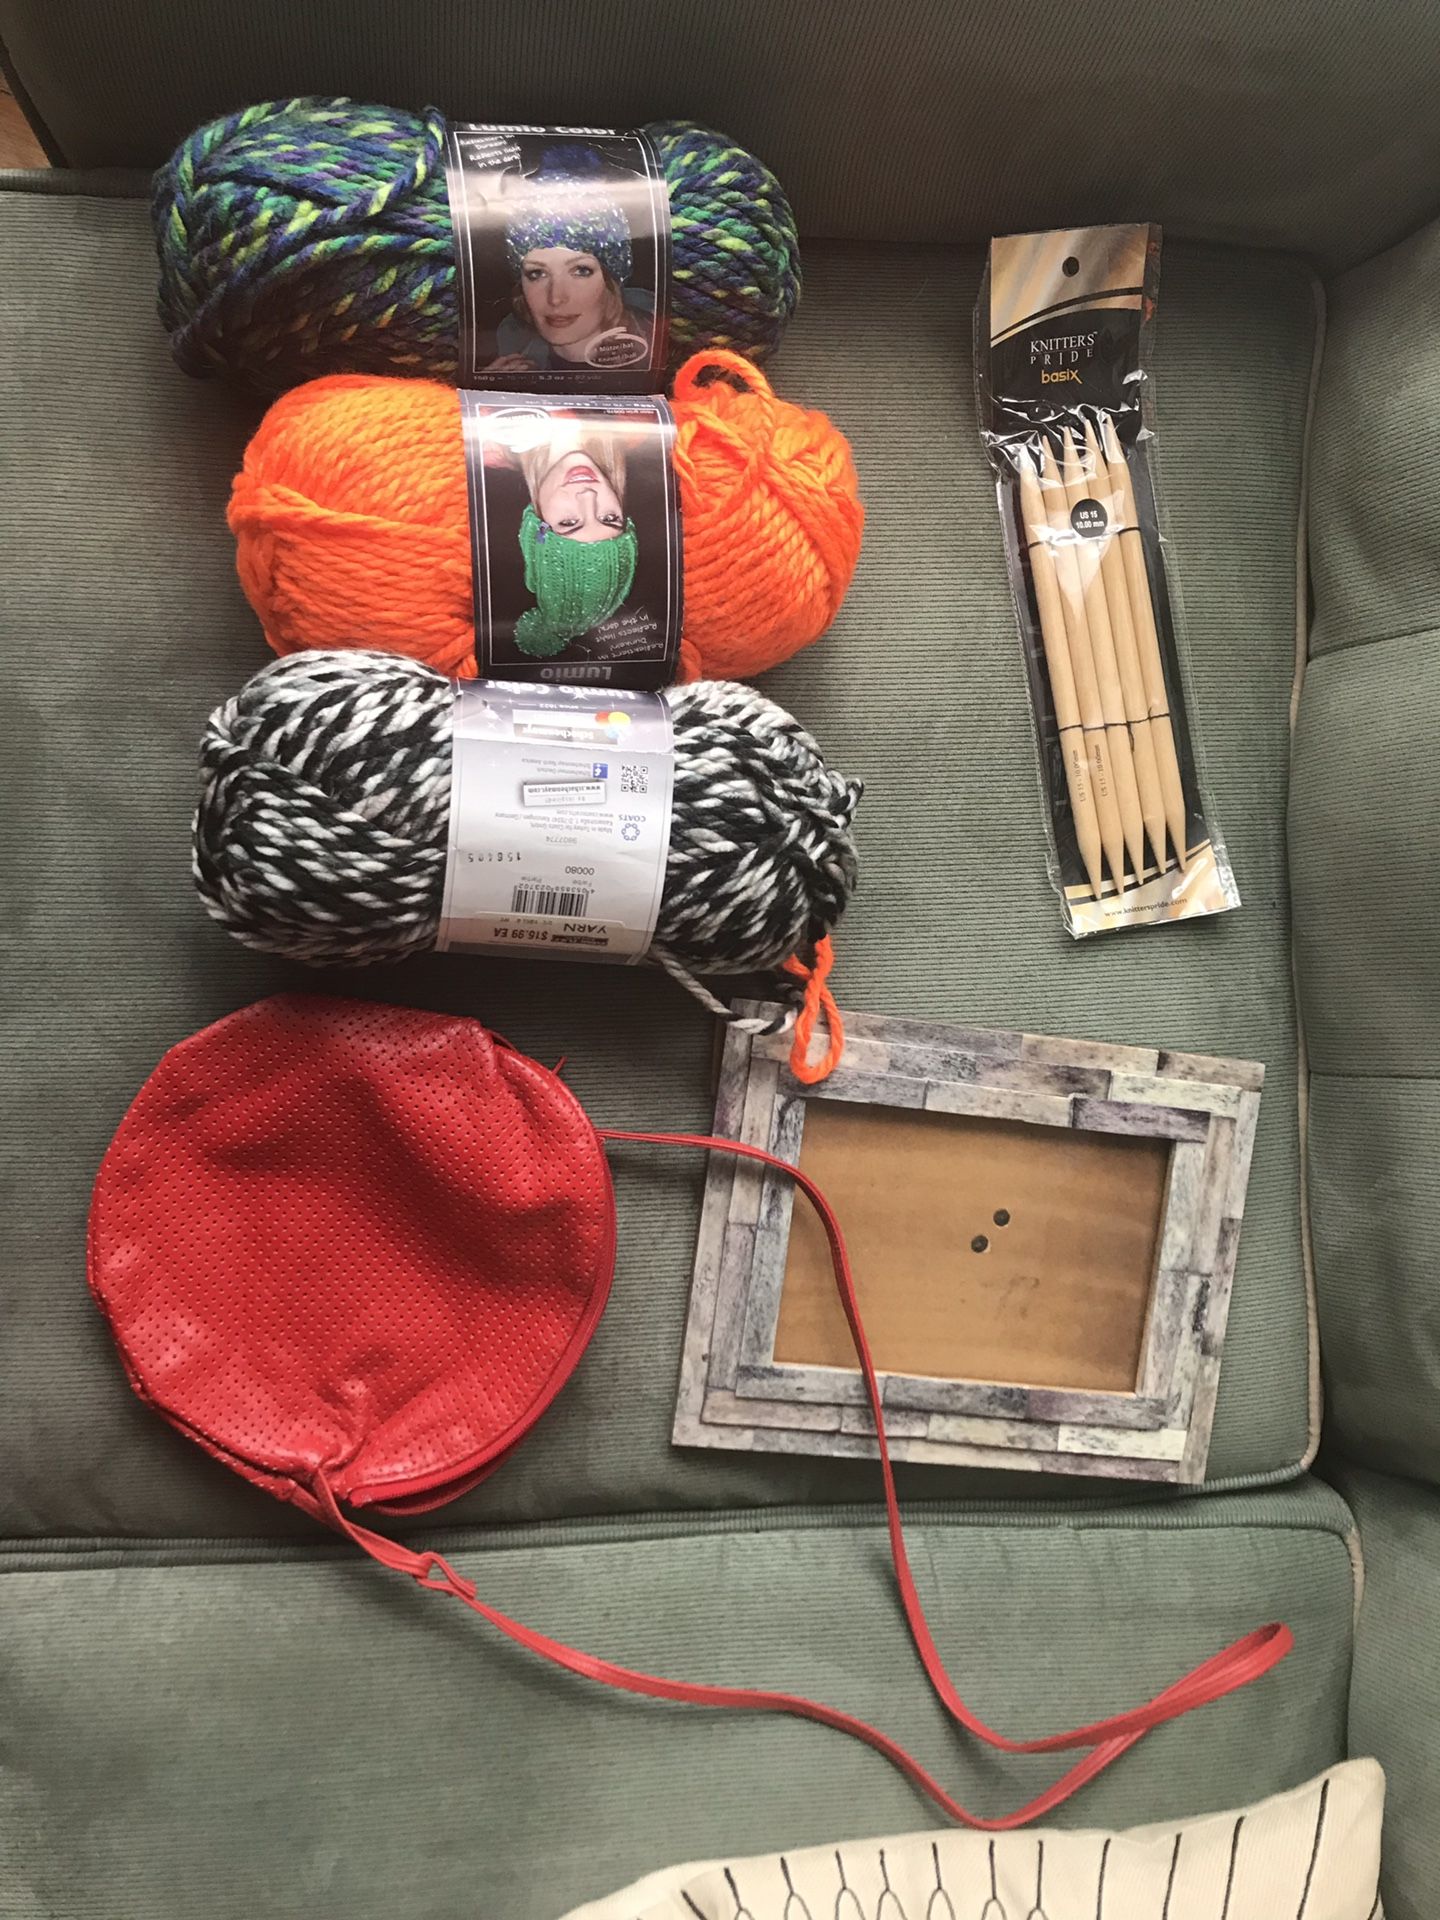 Free yarn and needles, picture frame, and red bag